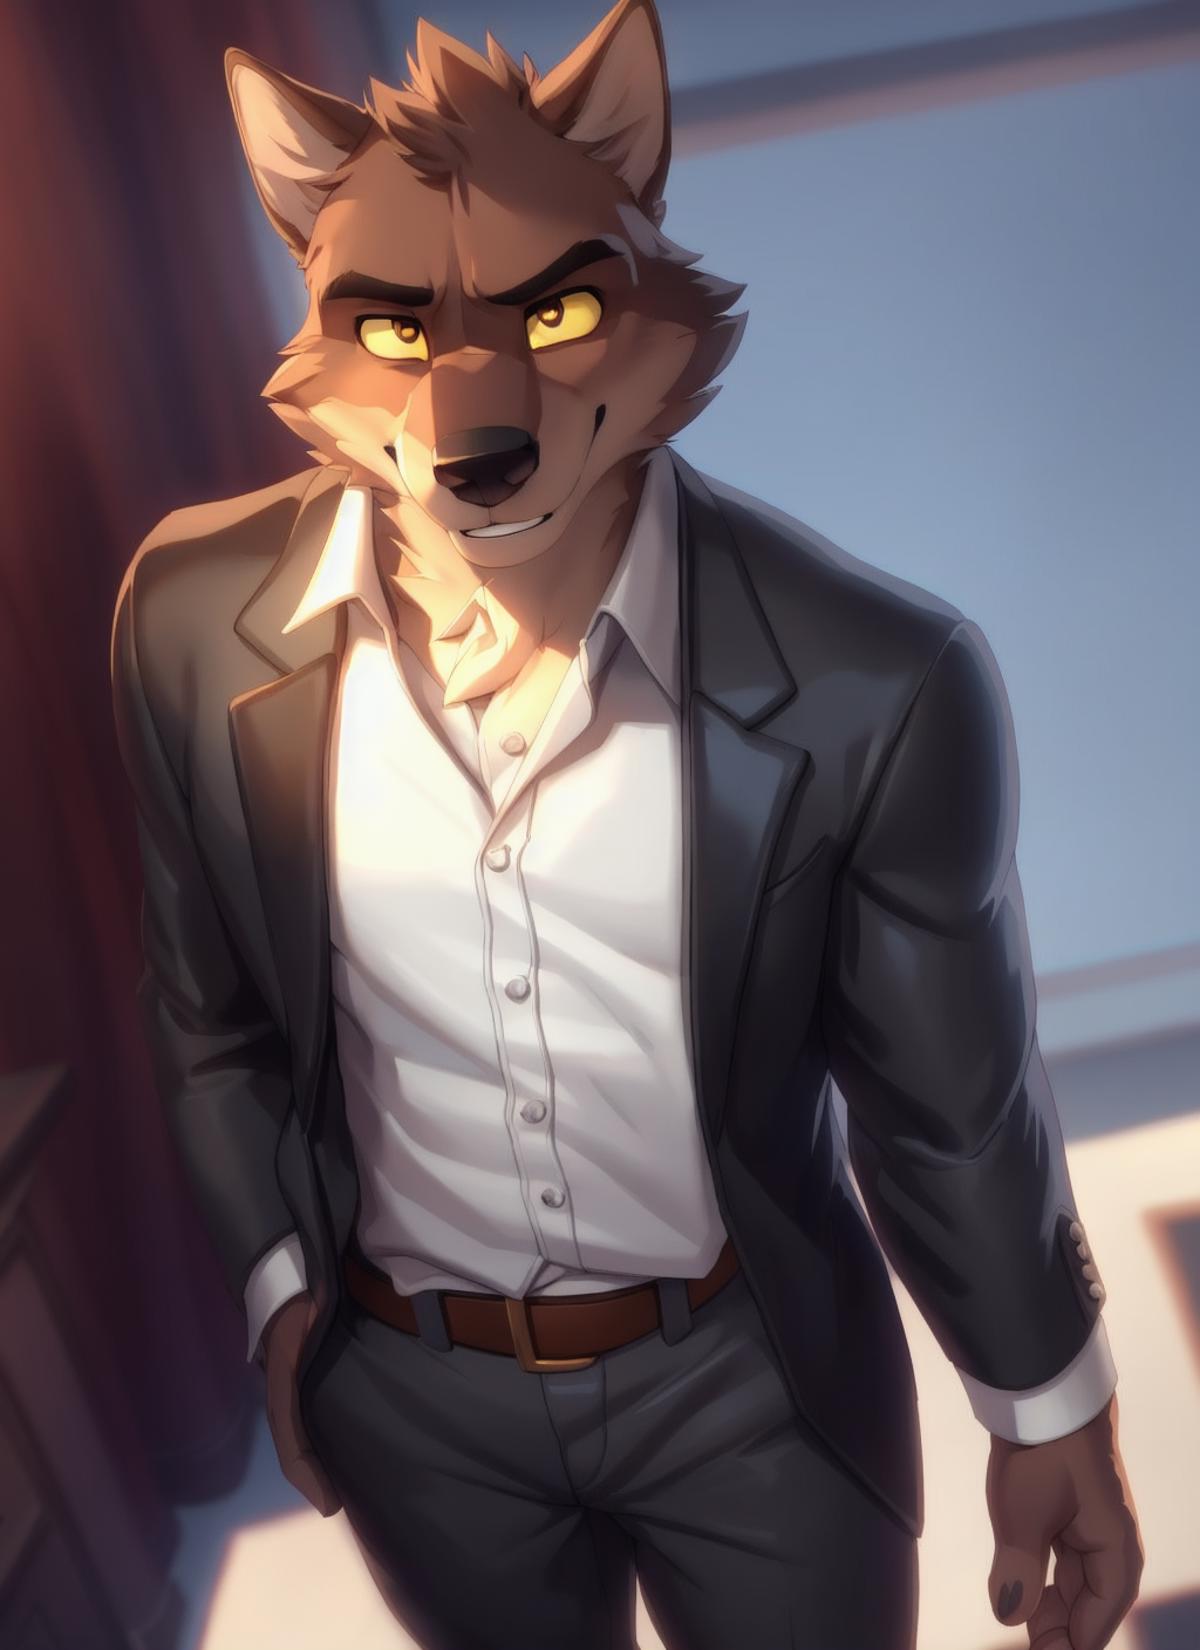 Mr. Wolf - The Bad Guys image by Orion_12